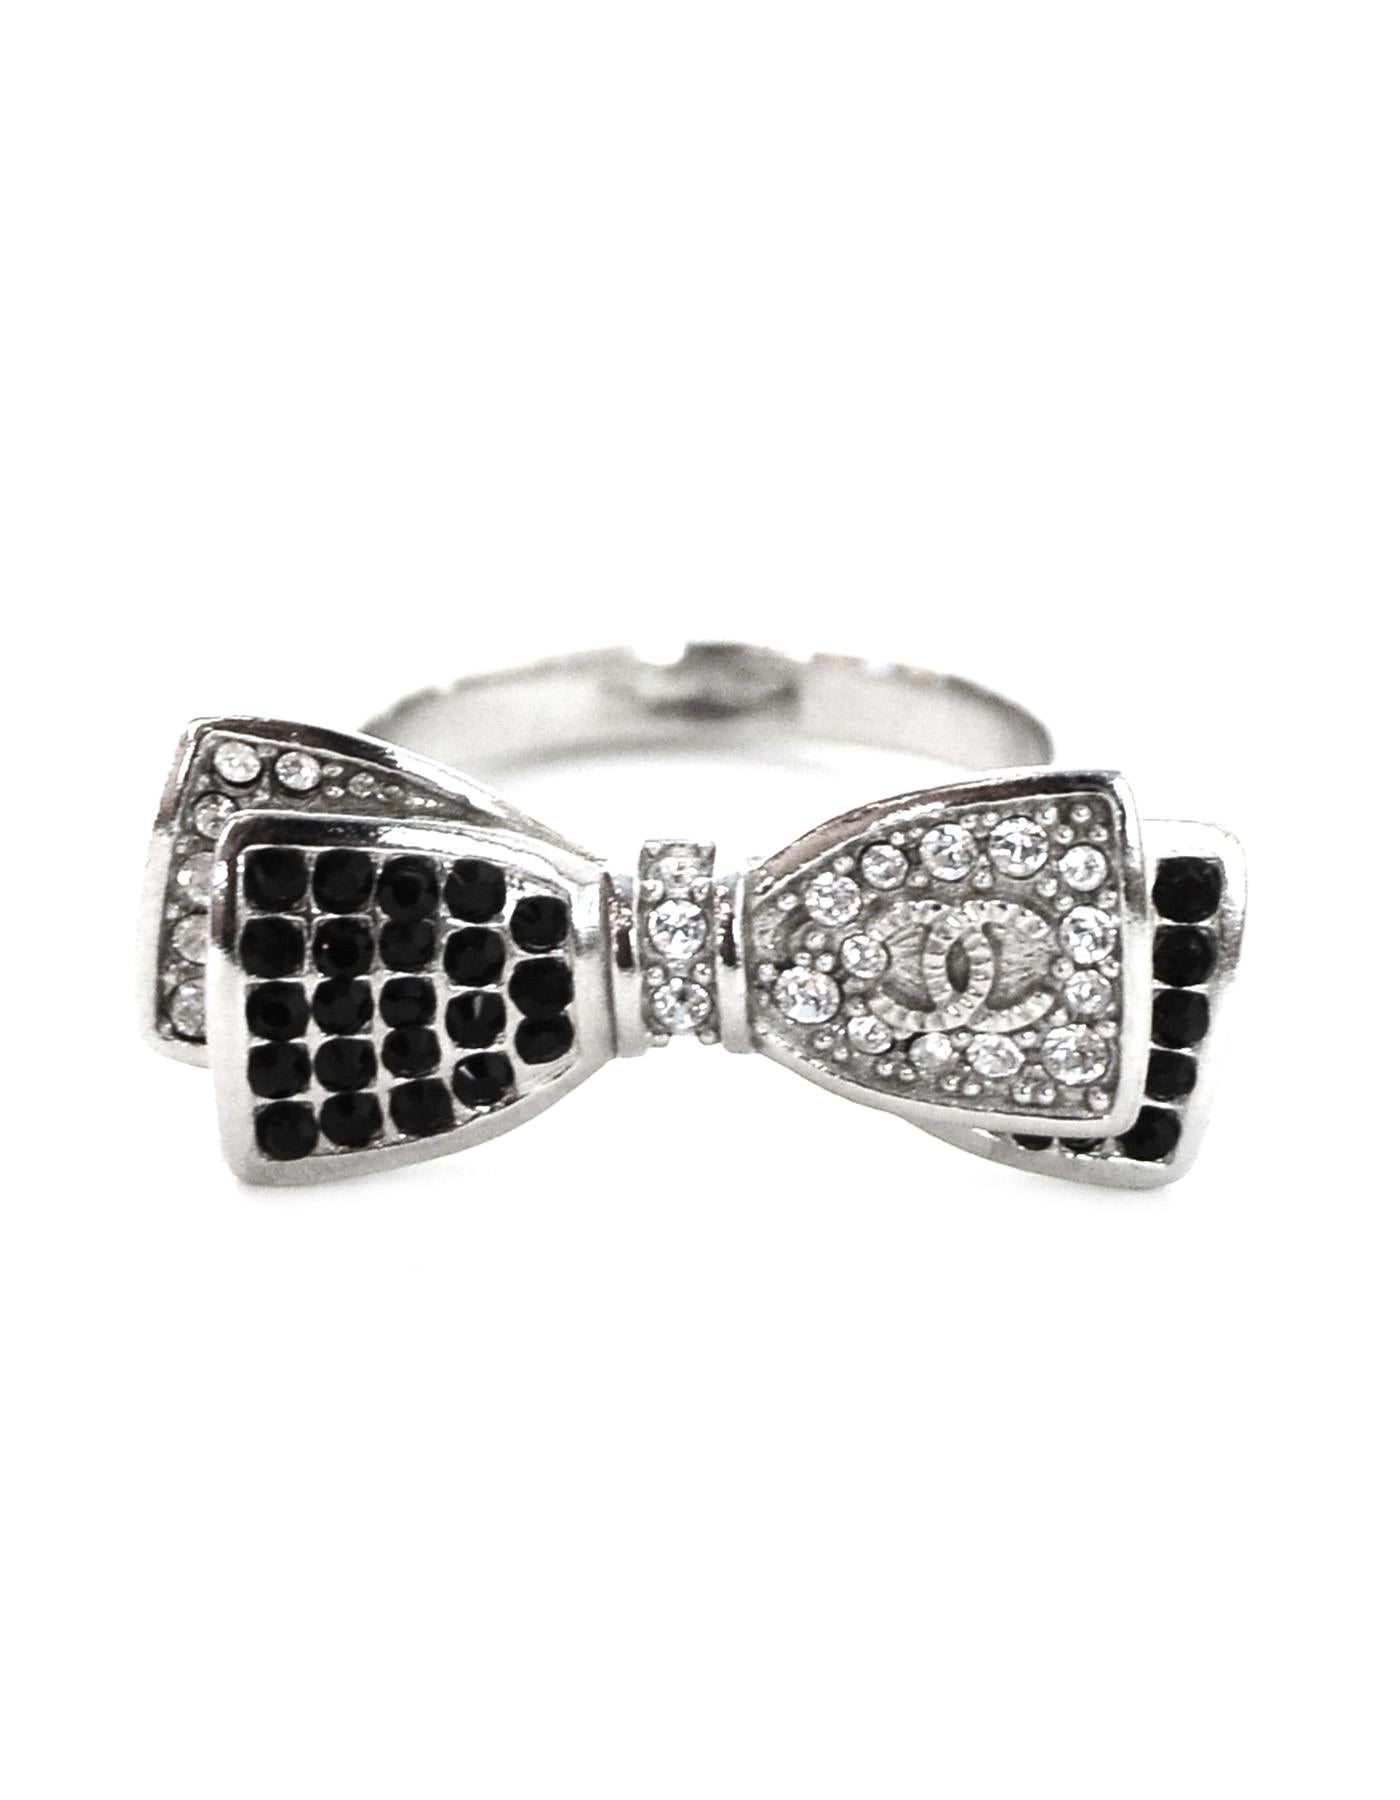 Chanel 2017 Crystal CC Bow Ring.  Features black and clear strass crystals, textured band and silvertone CC.

Made In: Italy
Year of Production: 2017
Colors: Black, clear and silvertone
Materials: Crystals, metal
Overall Condition: Excellent